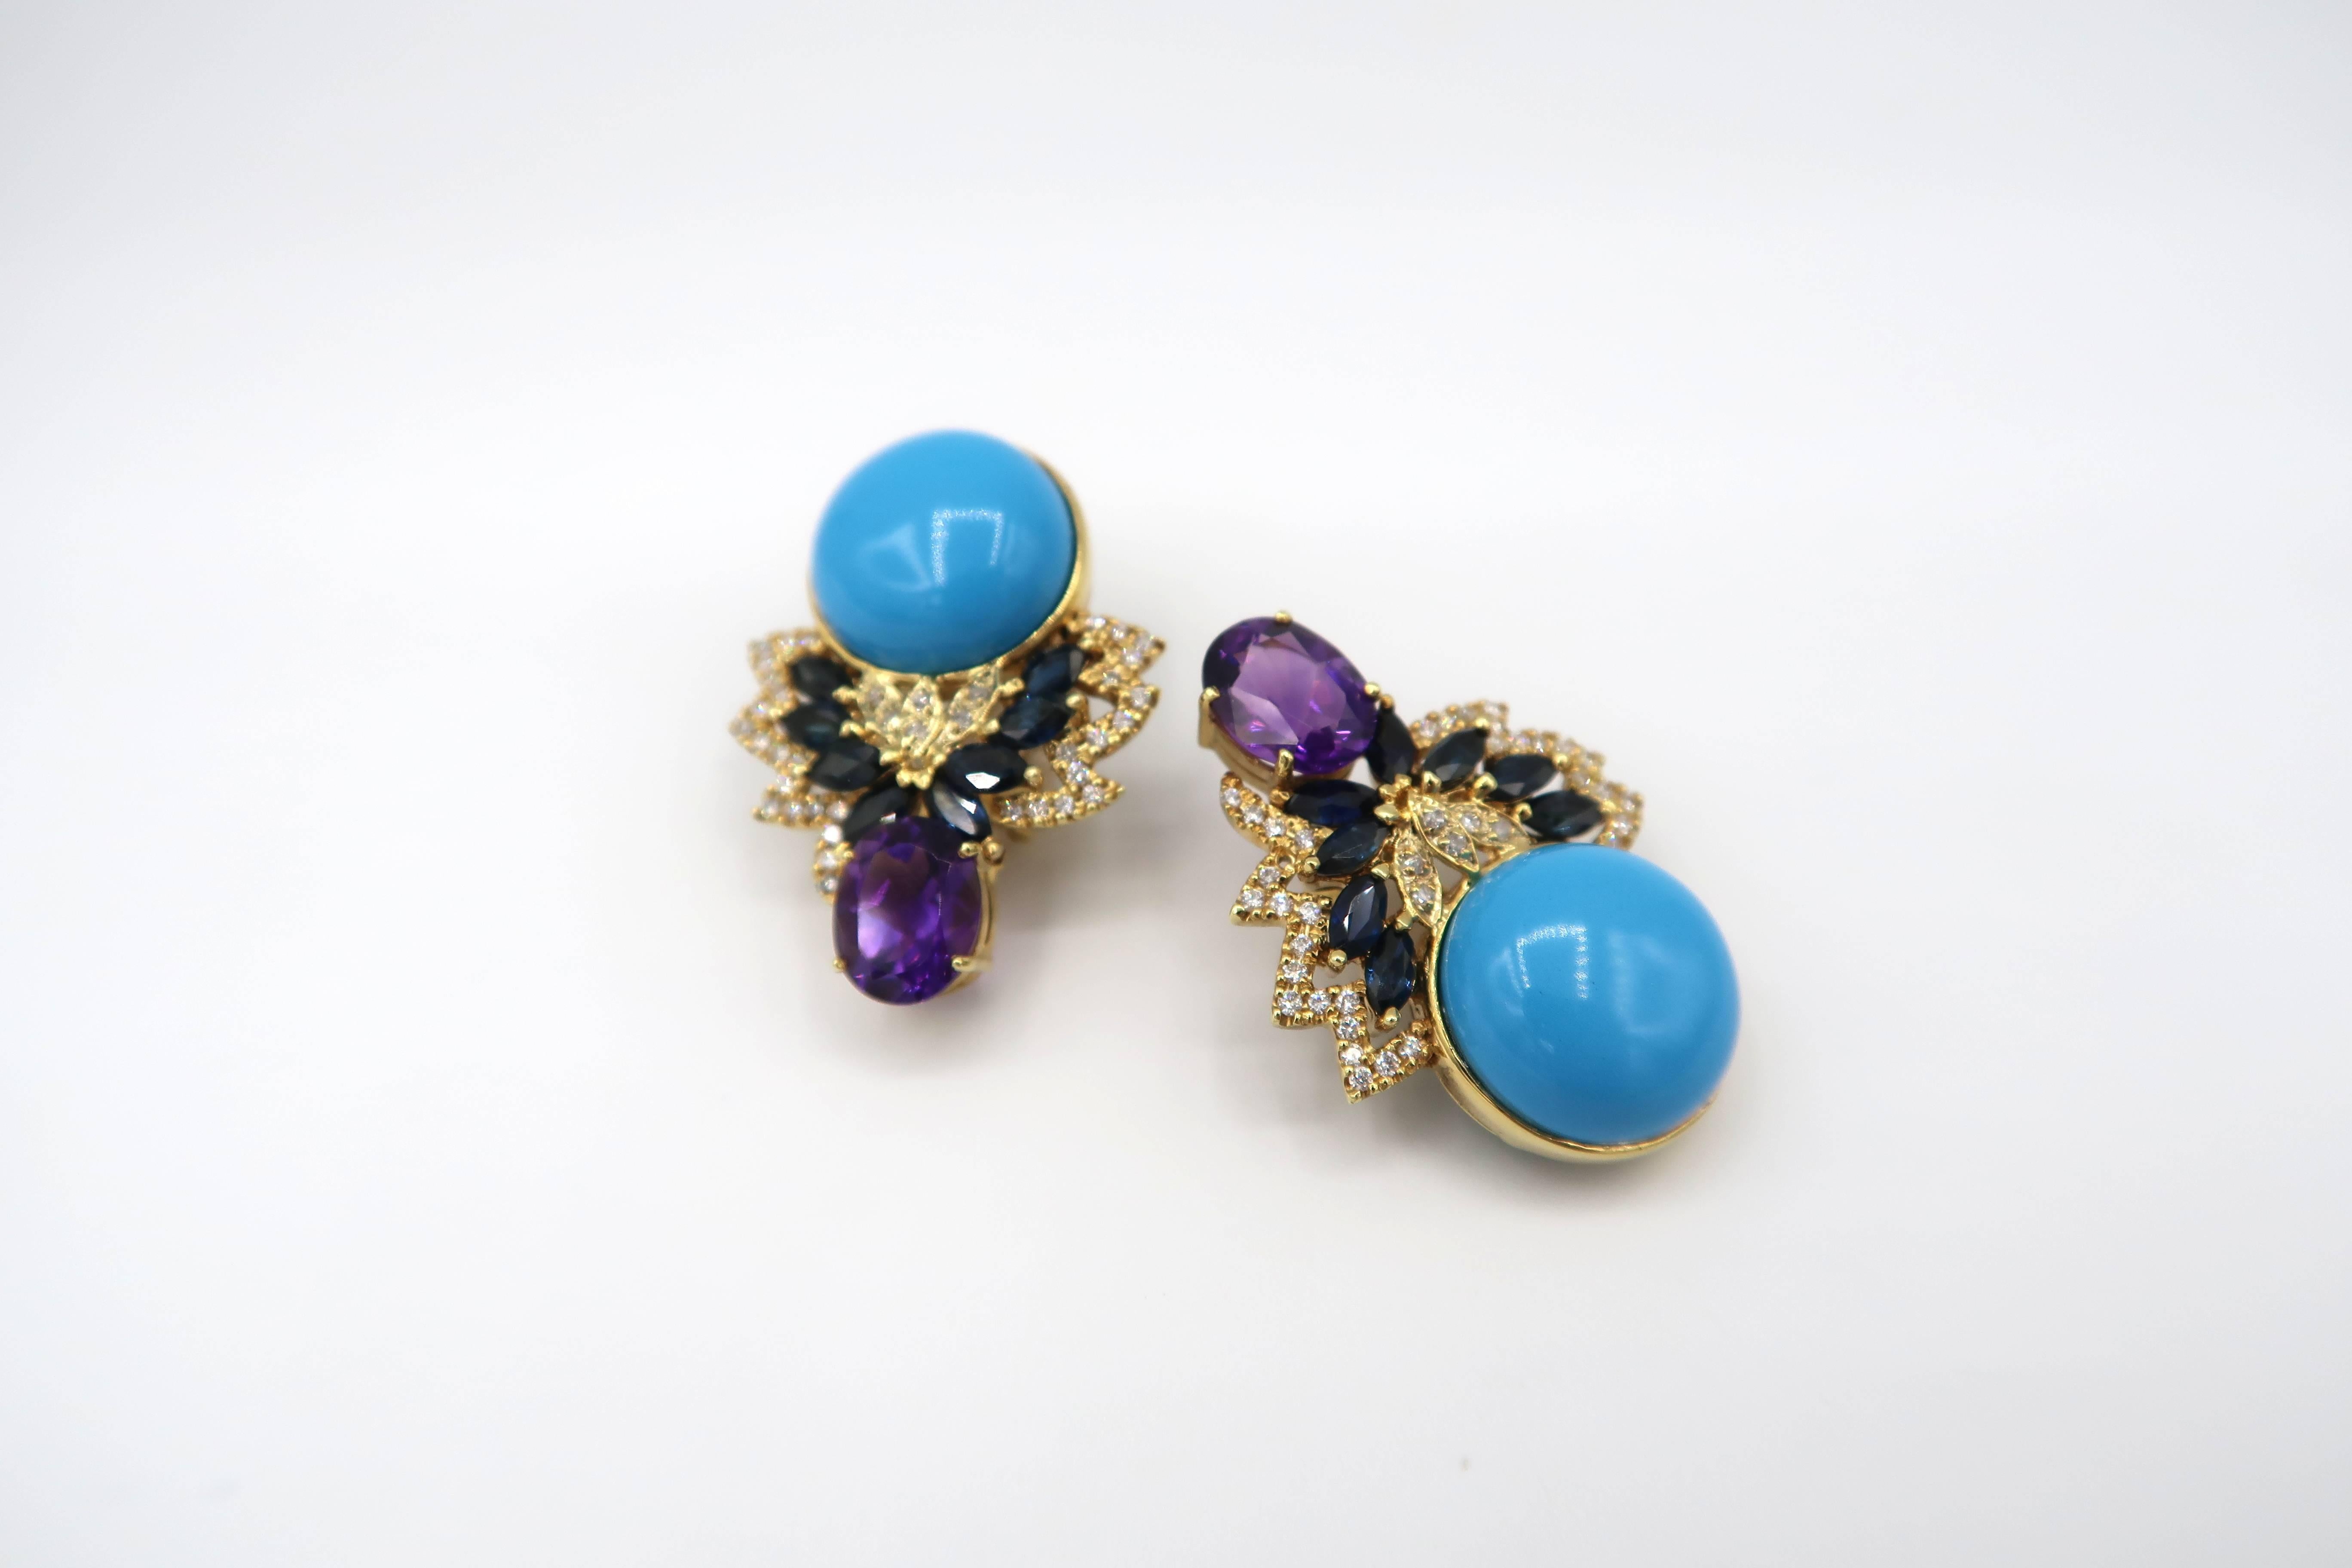 Boon turquoise clip earrings set in 18K yellow gold embellished with Amethyst, blue sapphire and diamond. Suitable for unpierced ears.

This piece comes with a complimentary international shipping.

Gold: 16.50g. 18K yellow gold
Blue Sapphire: